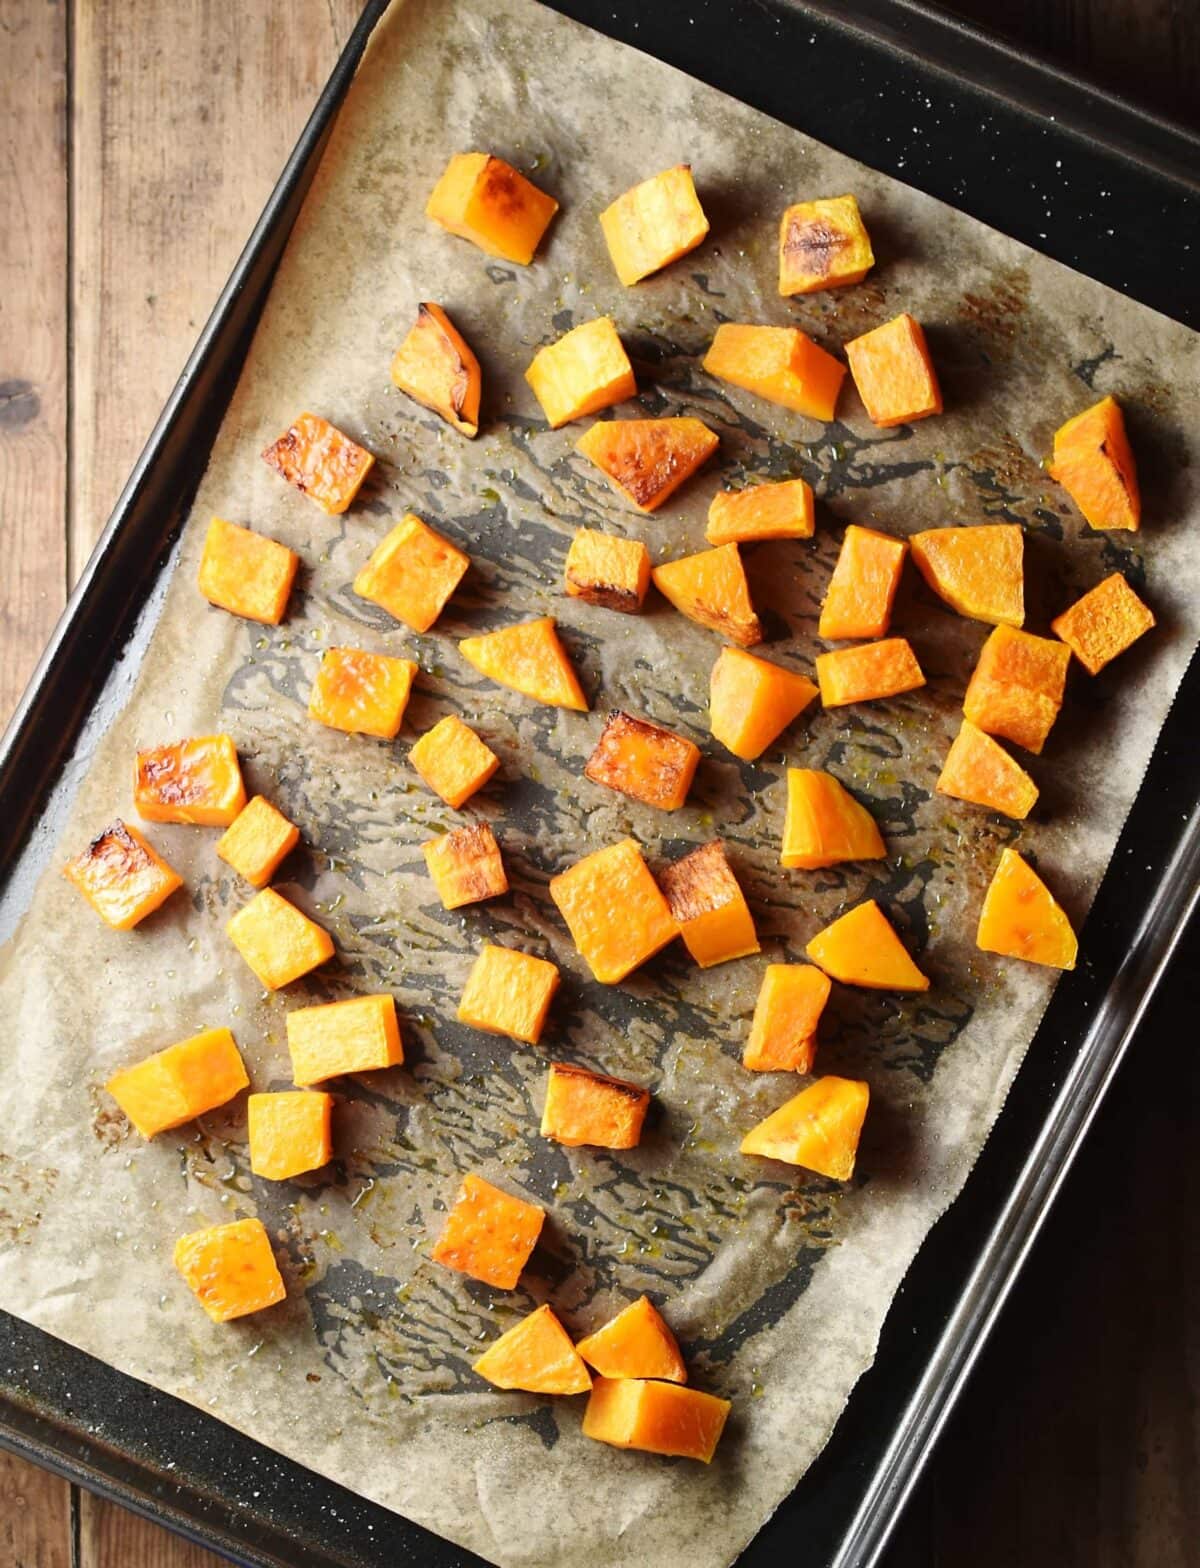 Butternut squash cubes on top of oven tray lined with parchment paper.